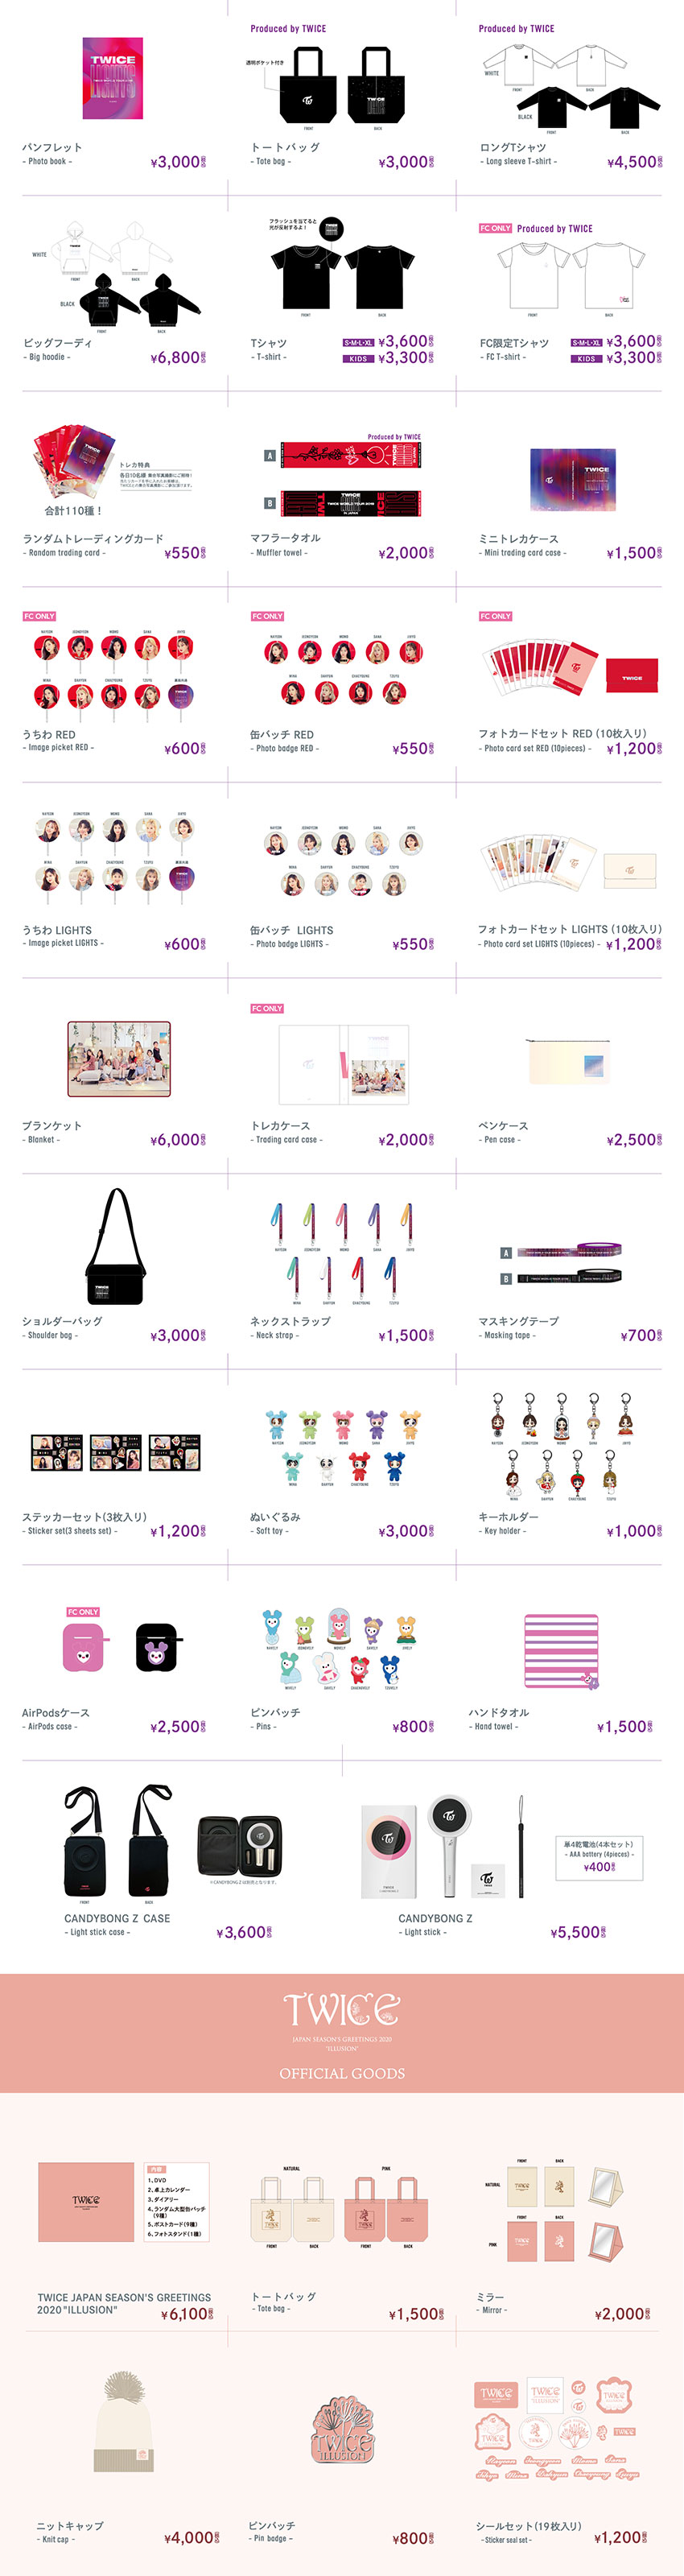 Twice World Tour 2019 Twicelights In Japan Twice Official Site